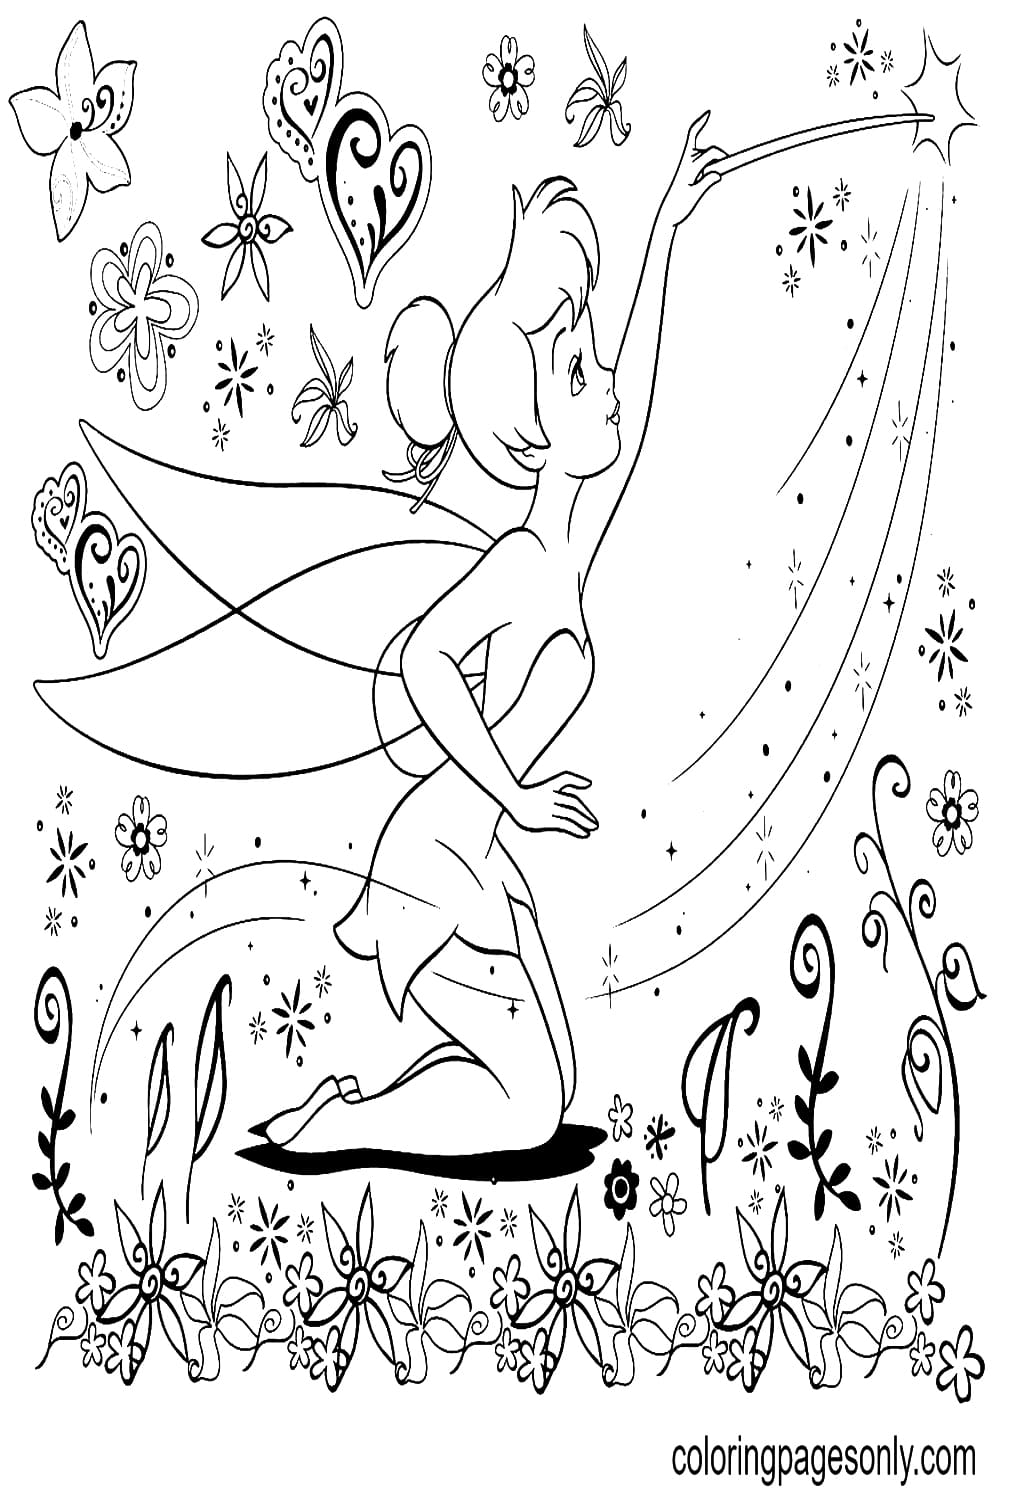 Tinkerbell has a Magic Wand Coloring Page